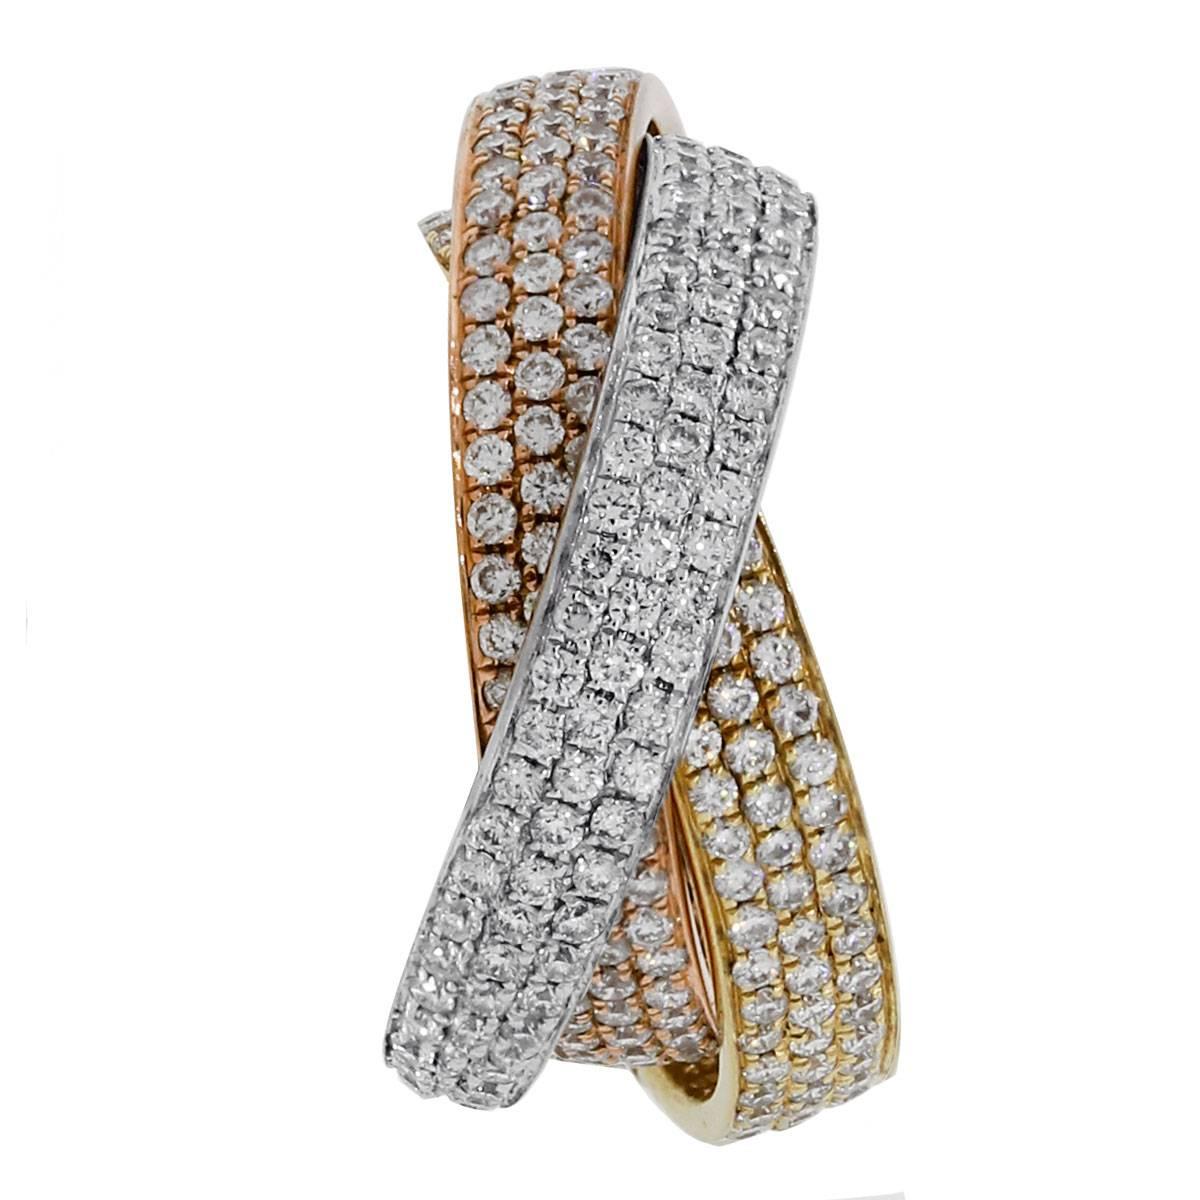 Material: 18k white gold, 18k yellow gold and 18k rose gold
Diamond Details: Approximately 3.01ctw round brilliant pave set diamonds. Diamonds are G/H in color and SI in clarity.
Ring Size: 6
Ring Measurements: 1″ x 0.45″ x 1″
Total Weight: 8.8g